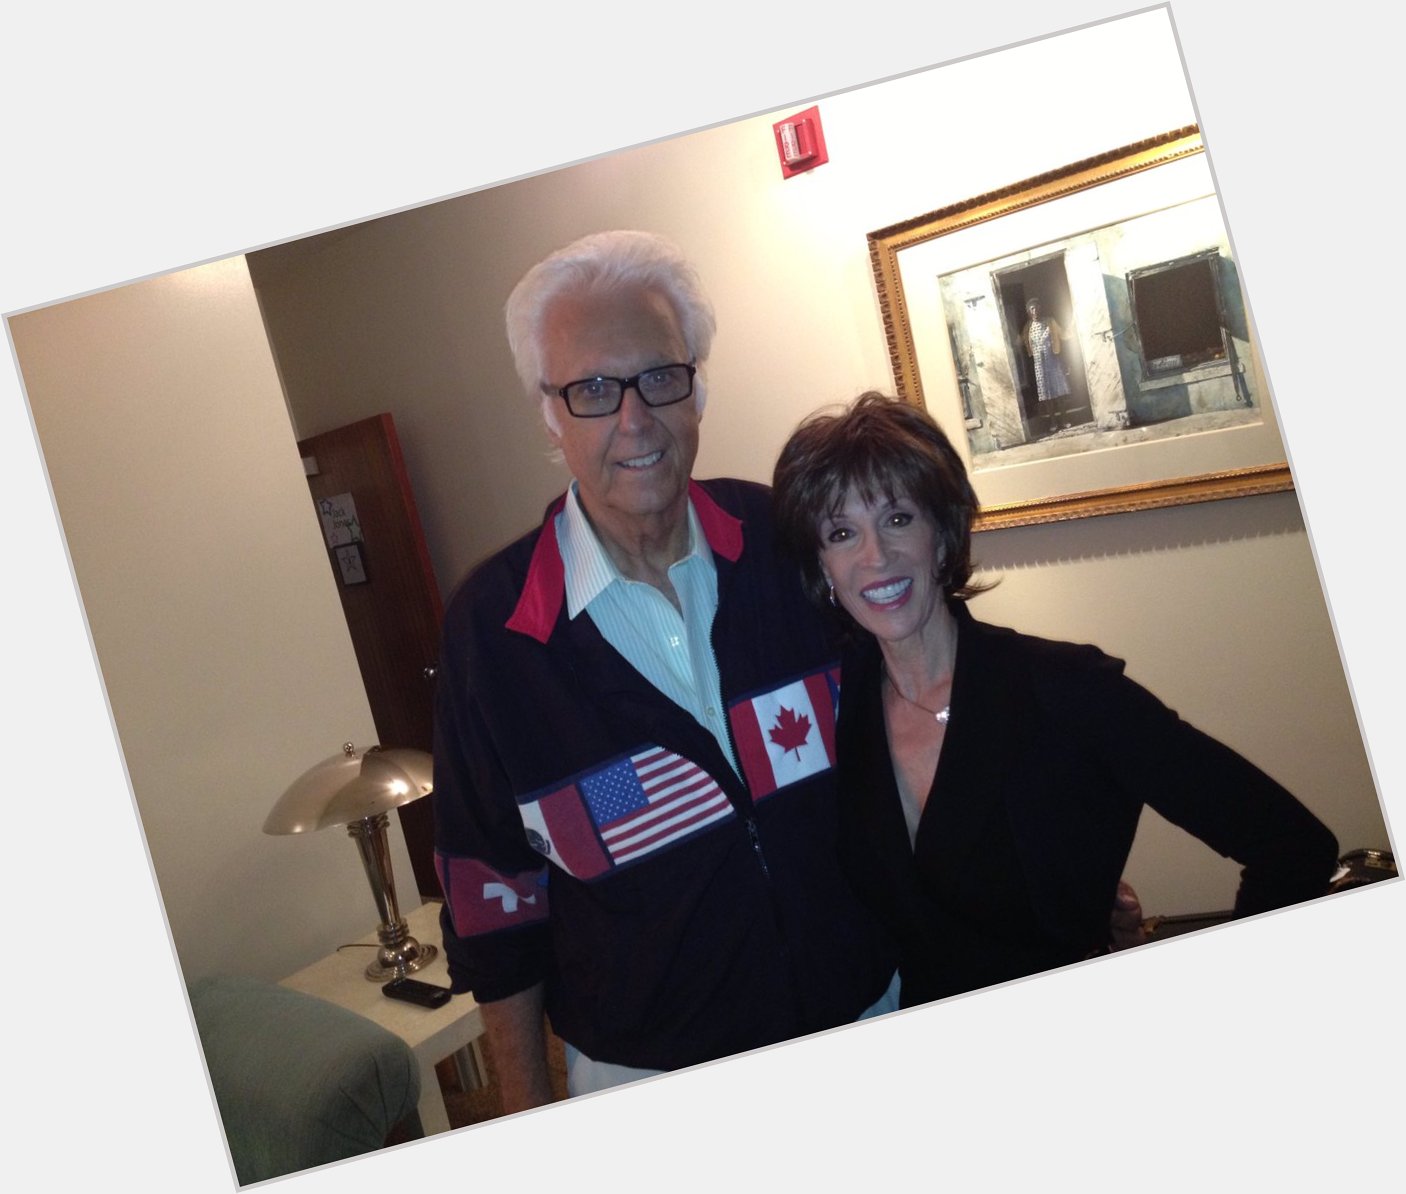 Sending Happy Birthday wishes our dear friend, the one and only, Jack Jones. 

Love,
Deana & John 